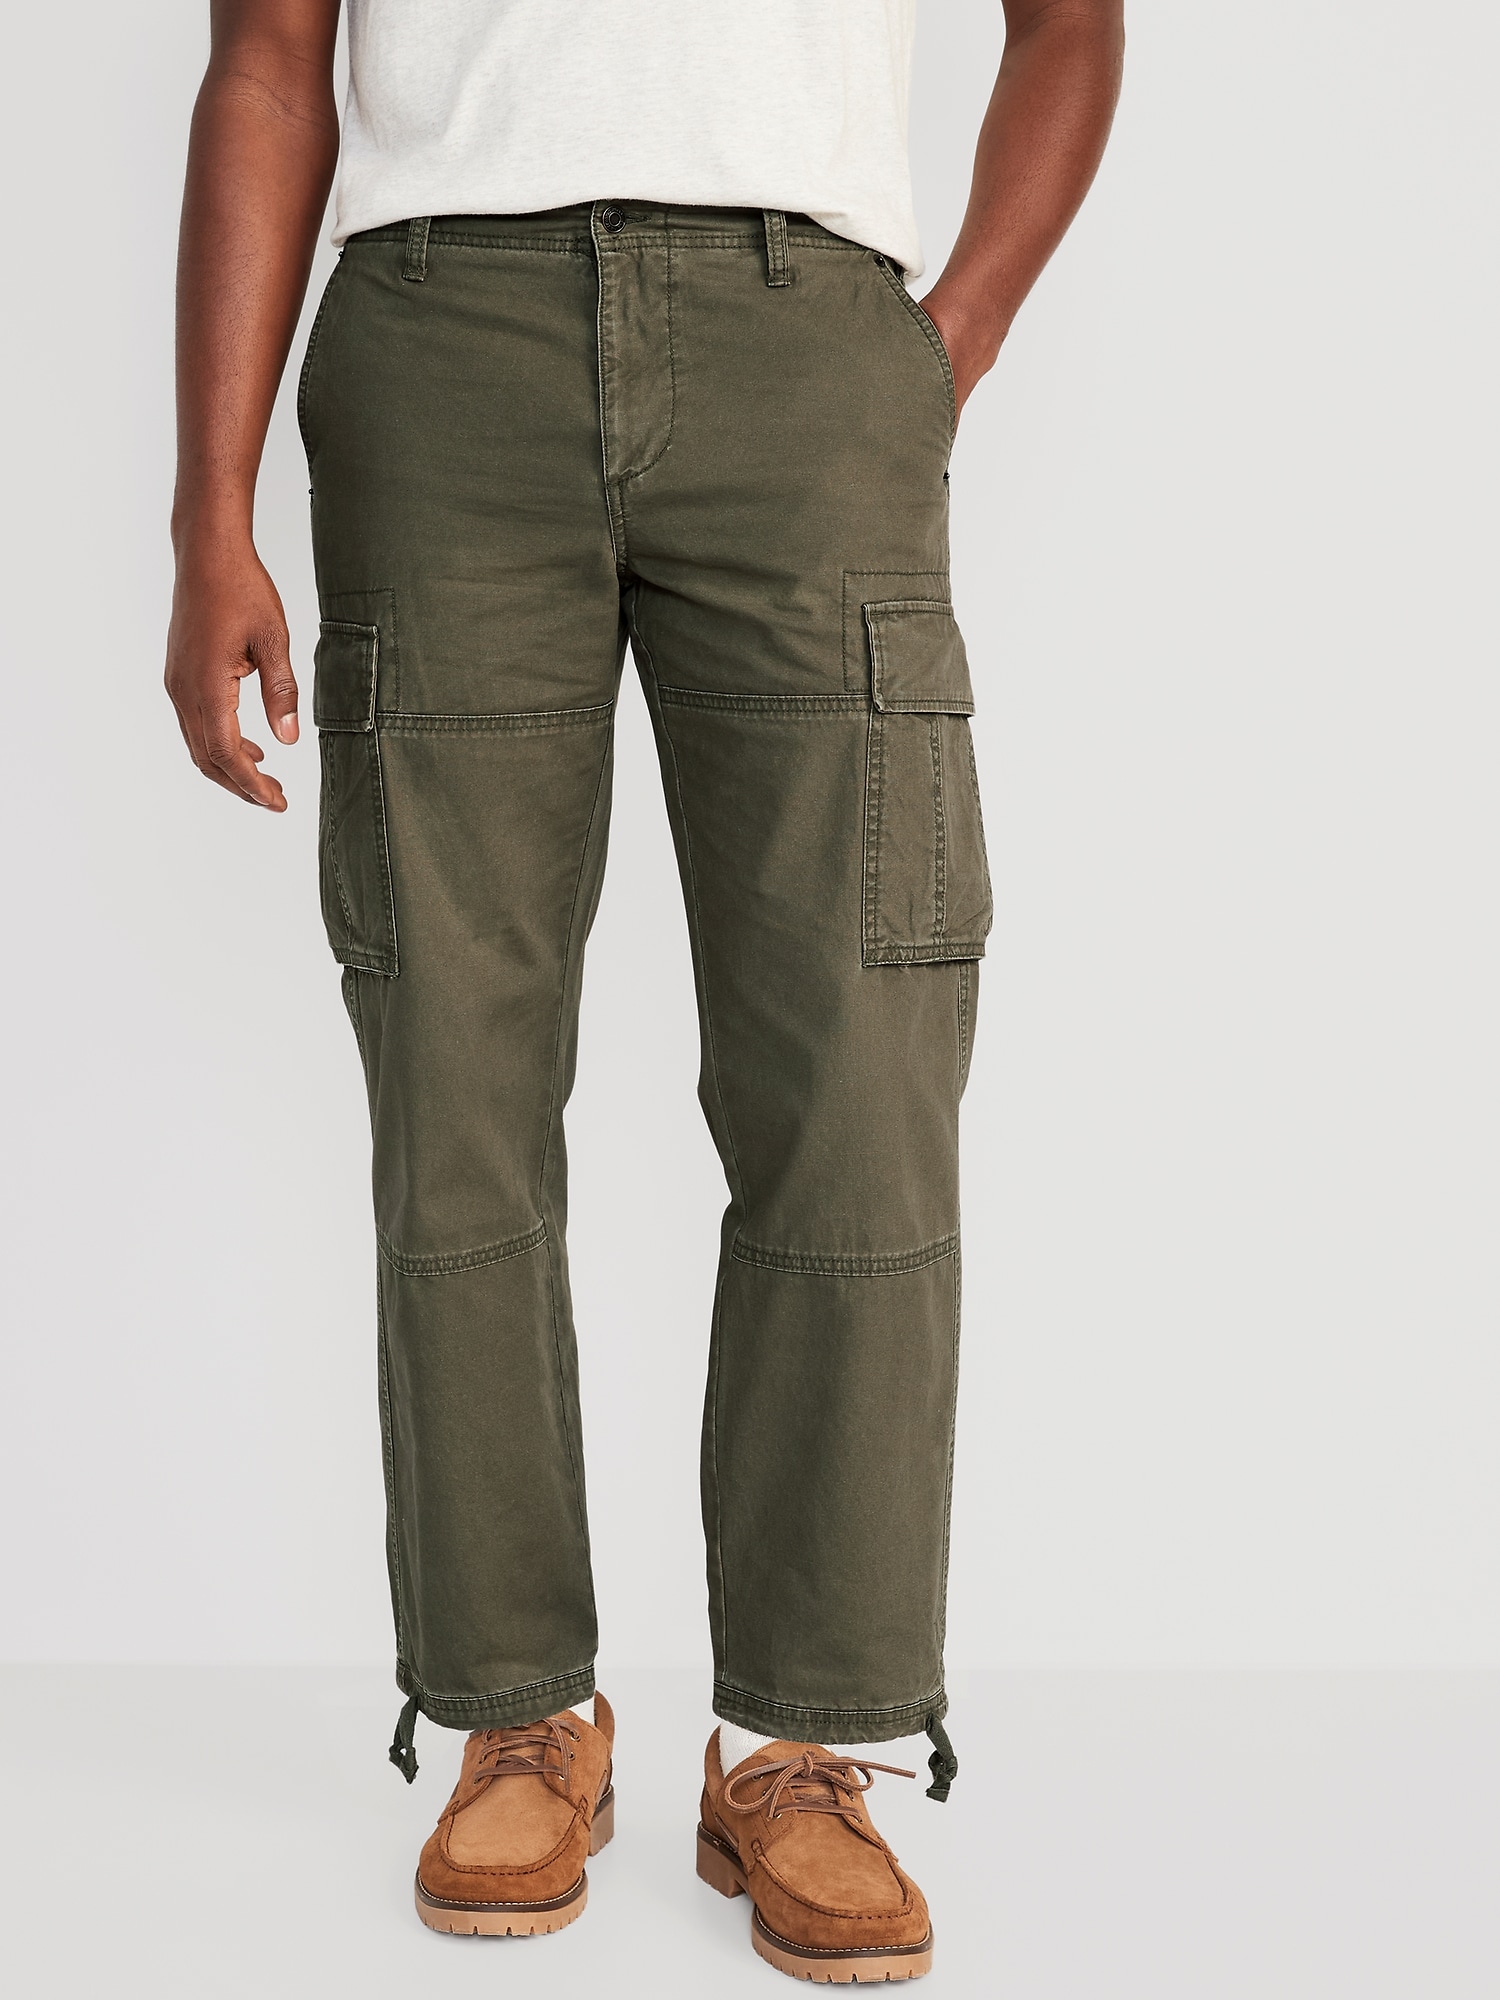 Old Navy Loose Taper 94 Cargo Ripstop Pants for Men